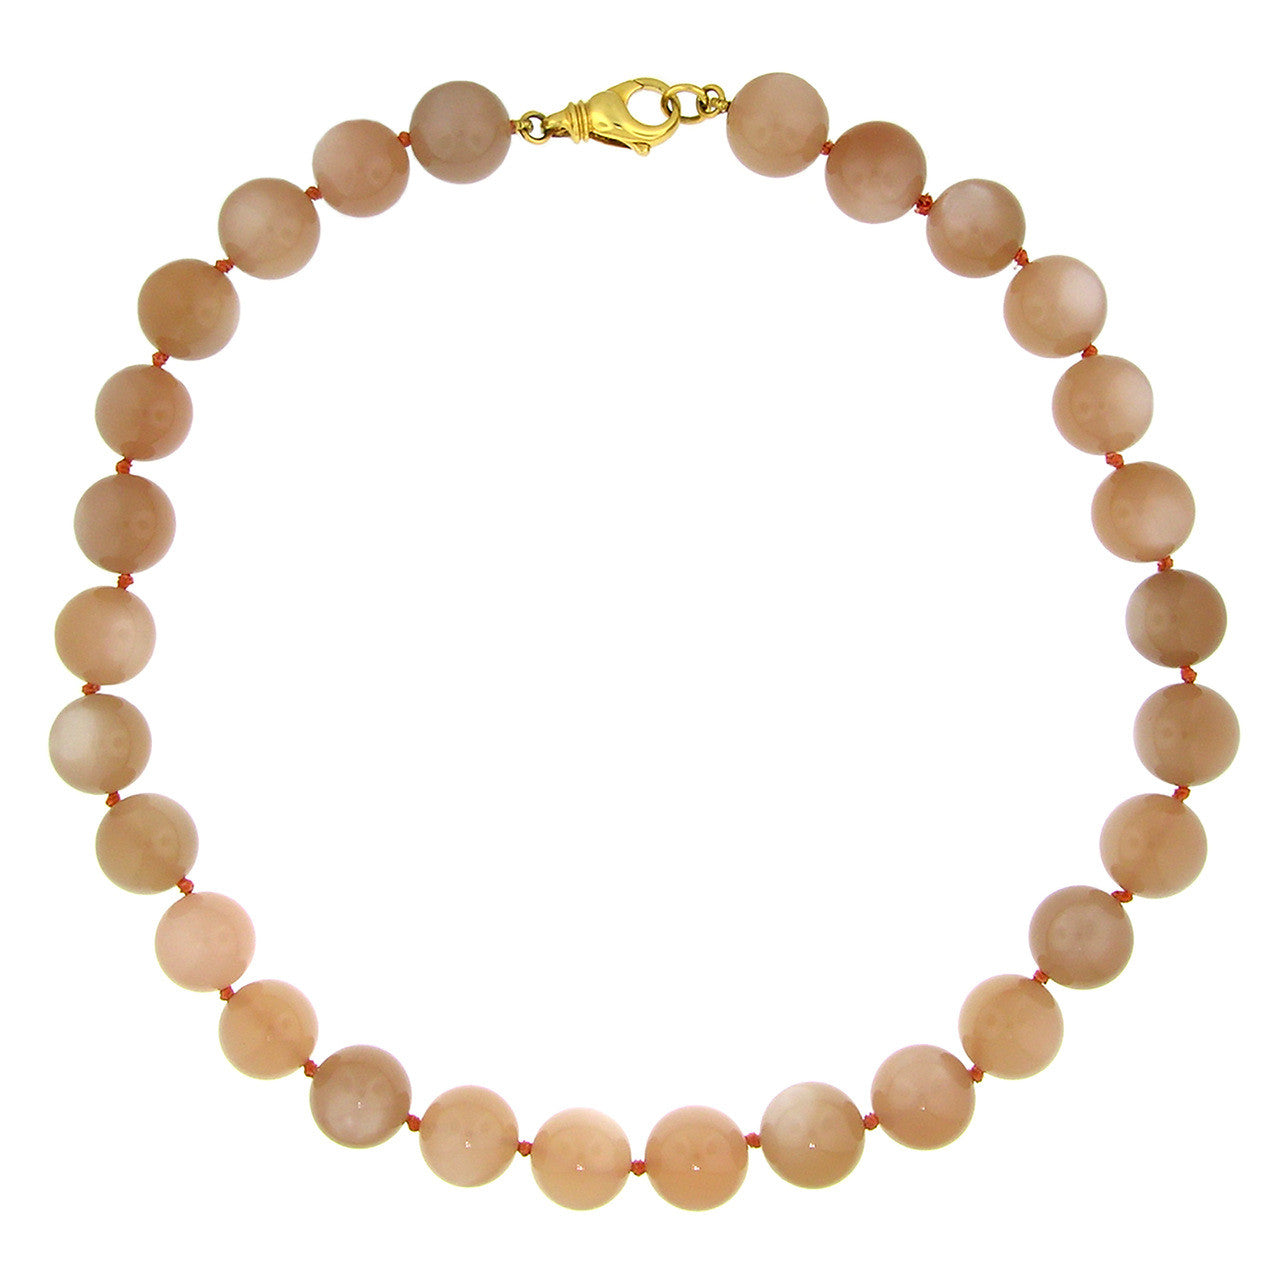 Peach Moonstone & 18kt Necklace made in USA by Cynthia Scott Jewelry